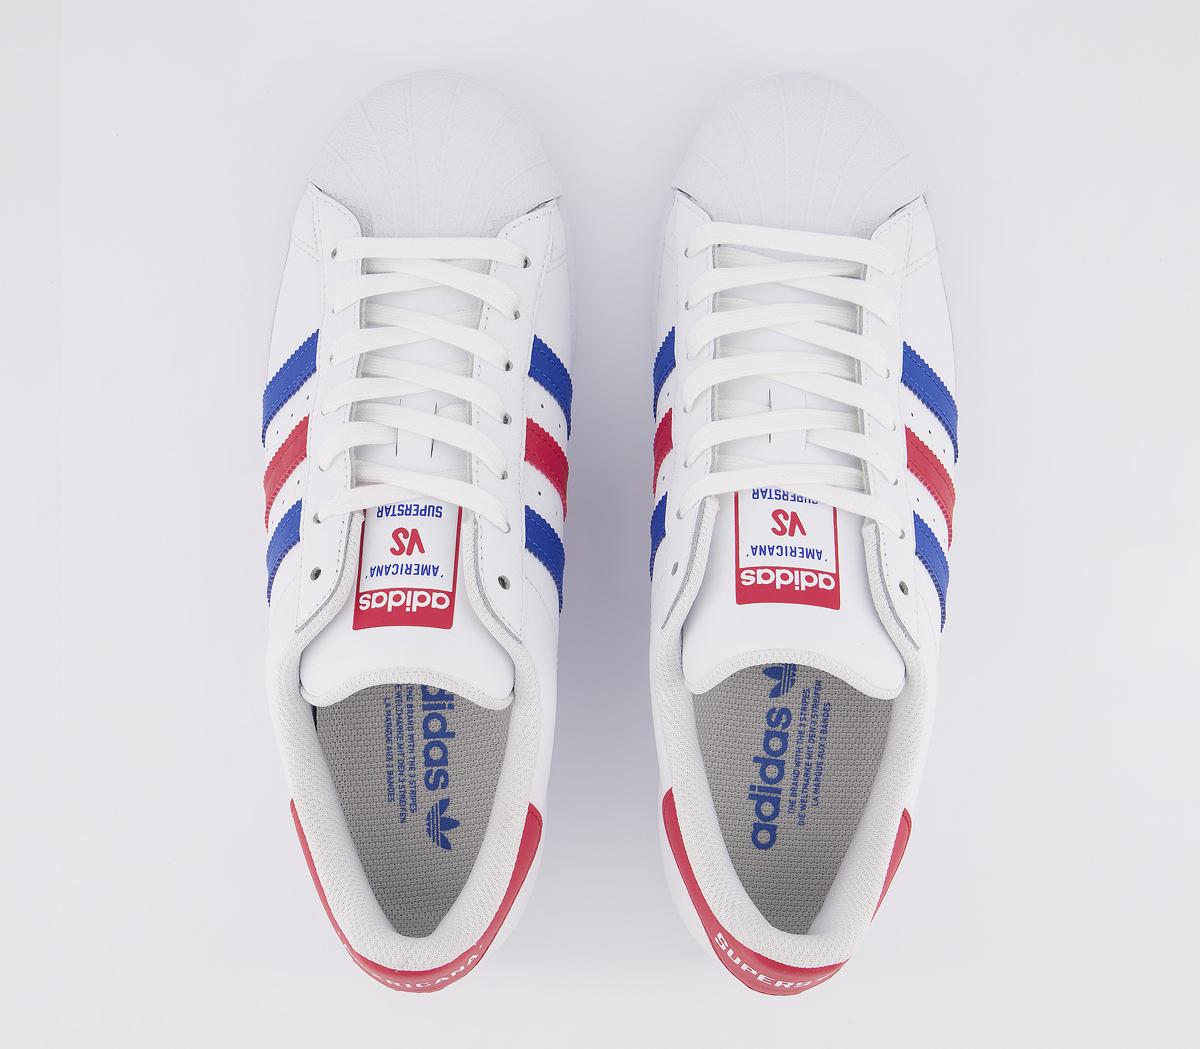 adidas Superstar Trainers White Blue Red - Unisex Sports